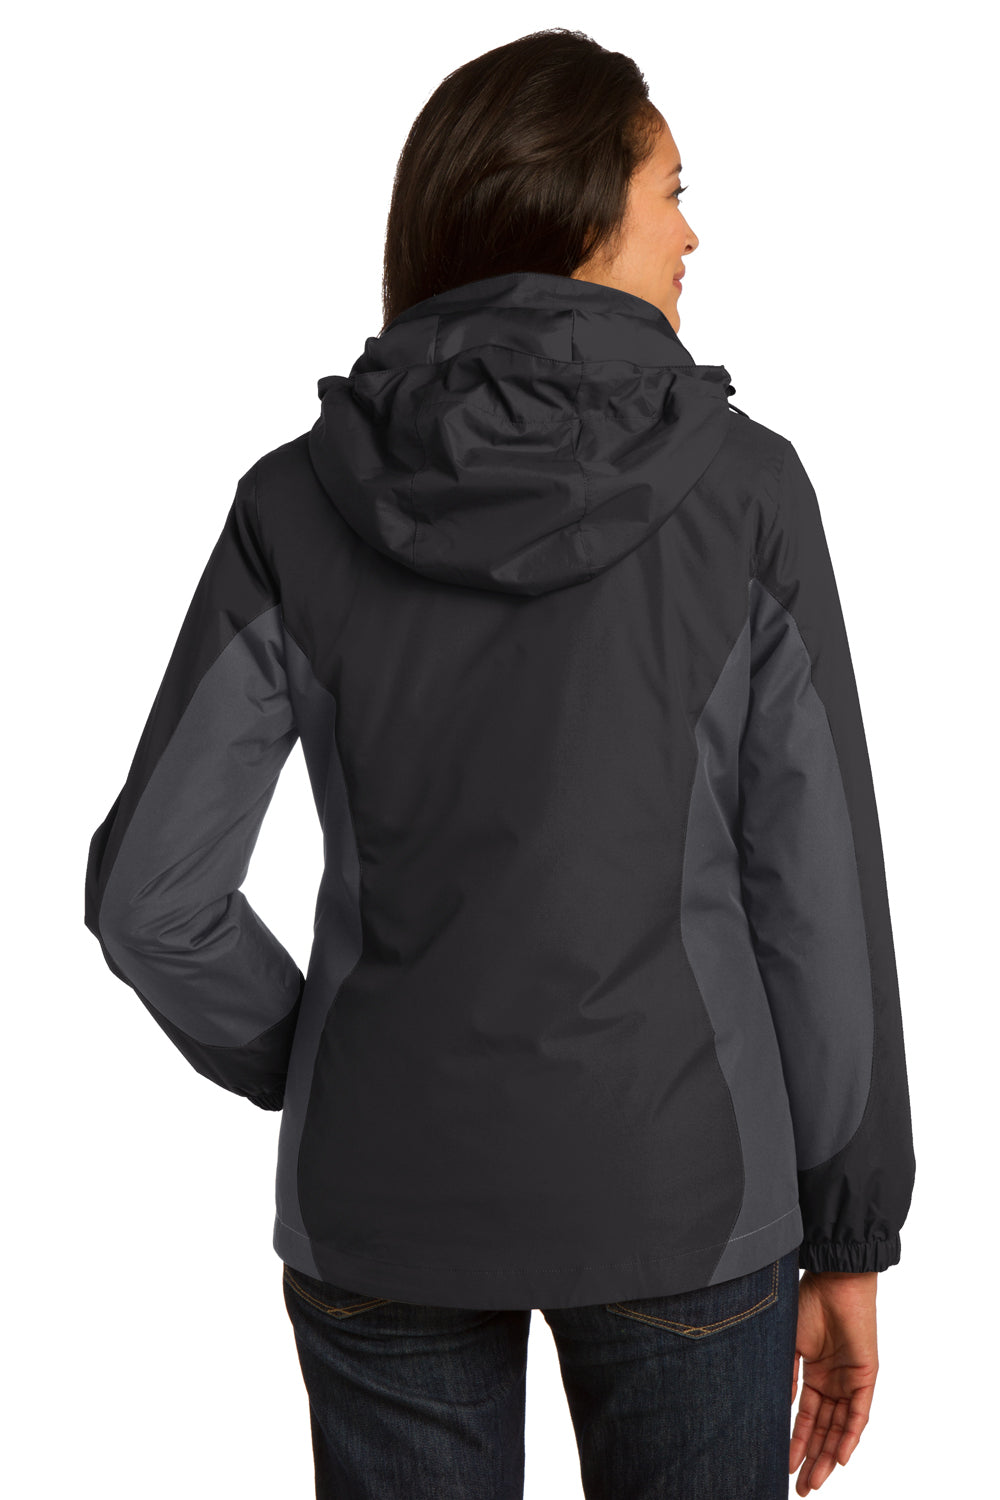 Port Authority L321 Womens 3-in-1 Wind & Water Resistant Full Zip Hooded Jacket Black/Grey/Red Back